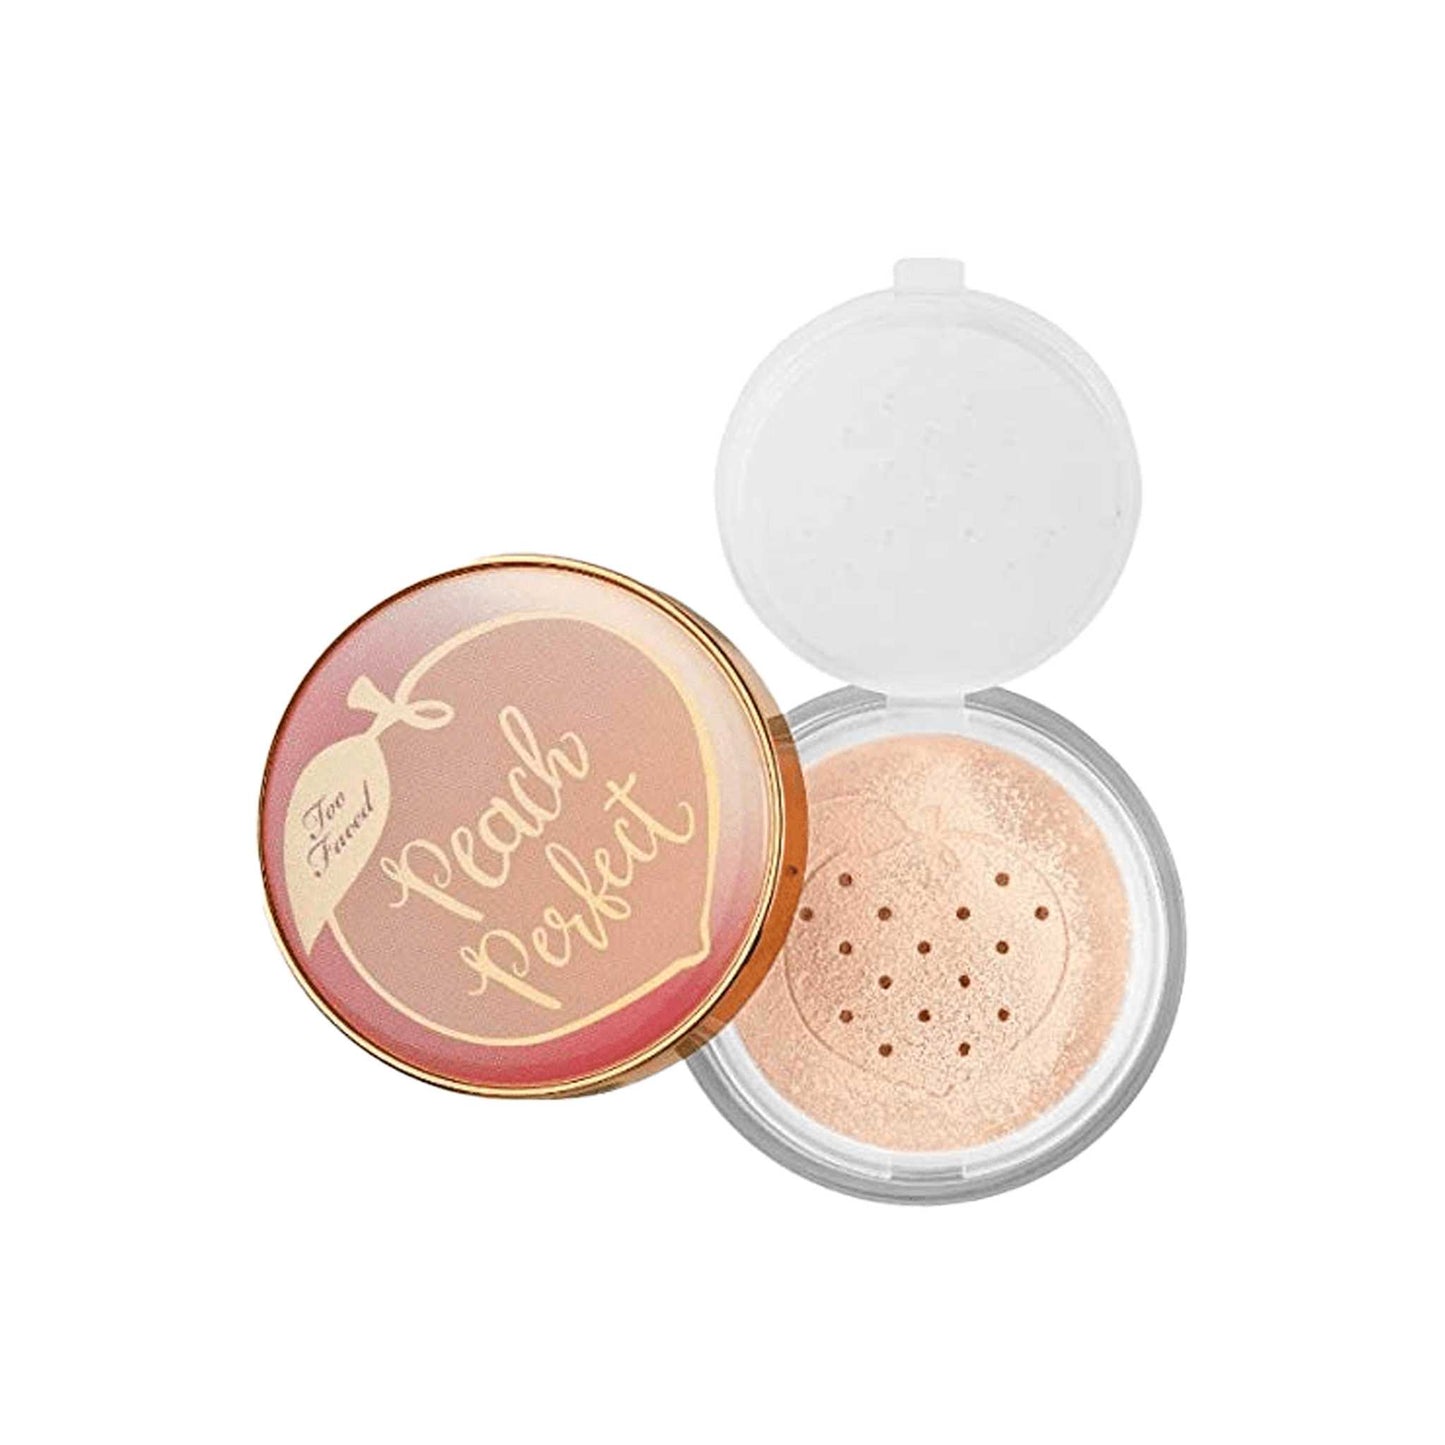 Too Faced Peach Perfect Mattifying Loose Setting Powder Too Faced